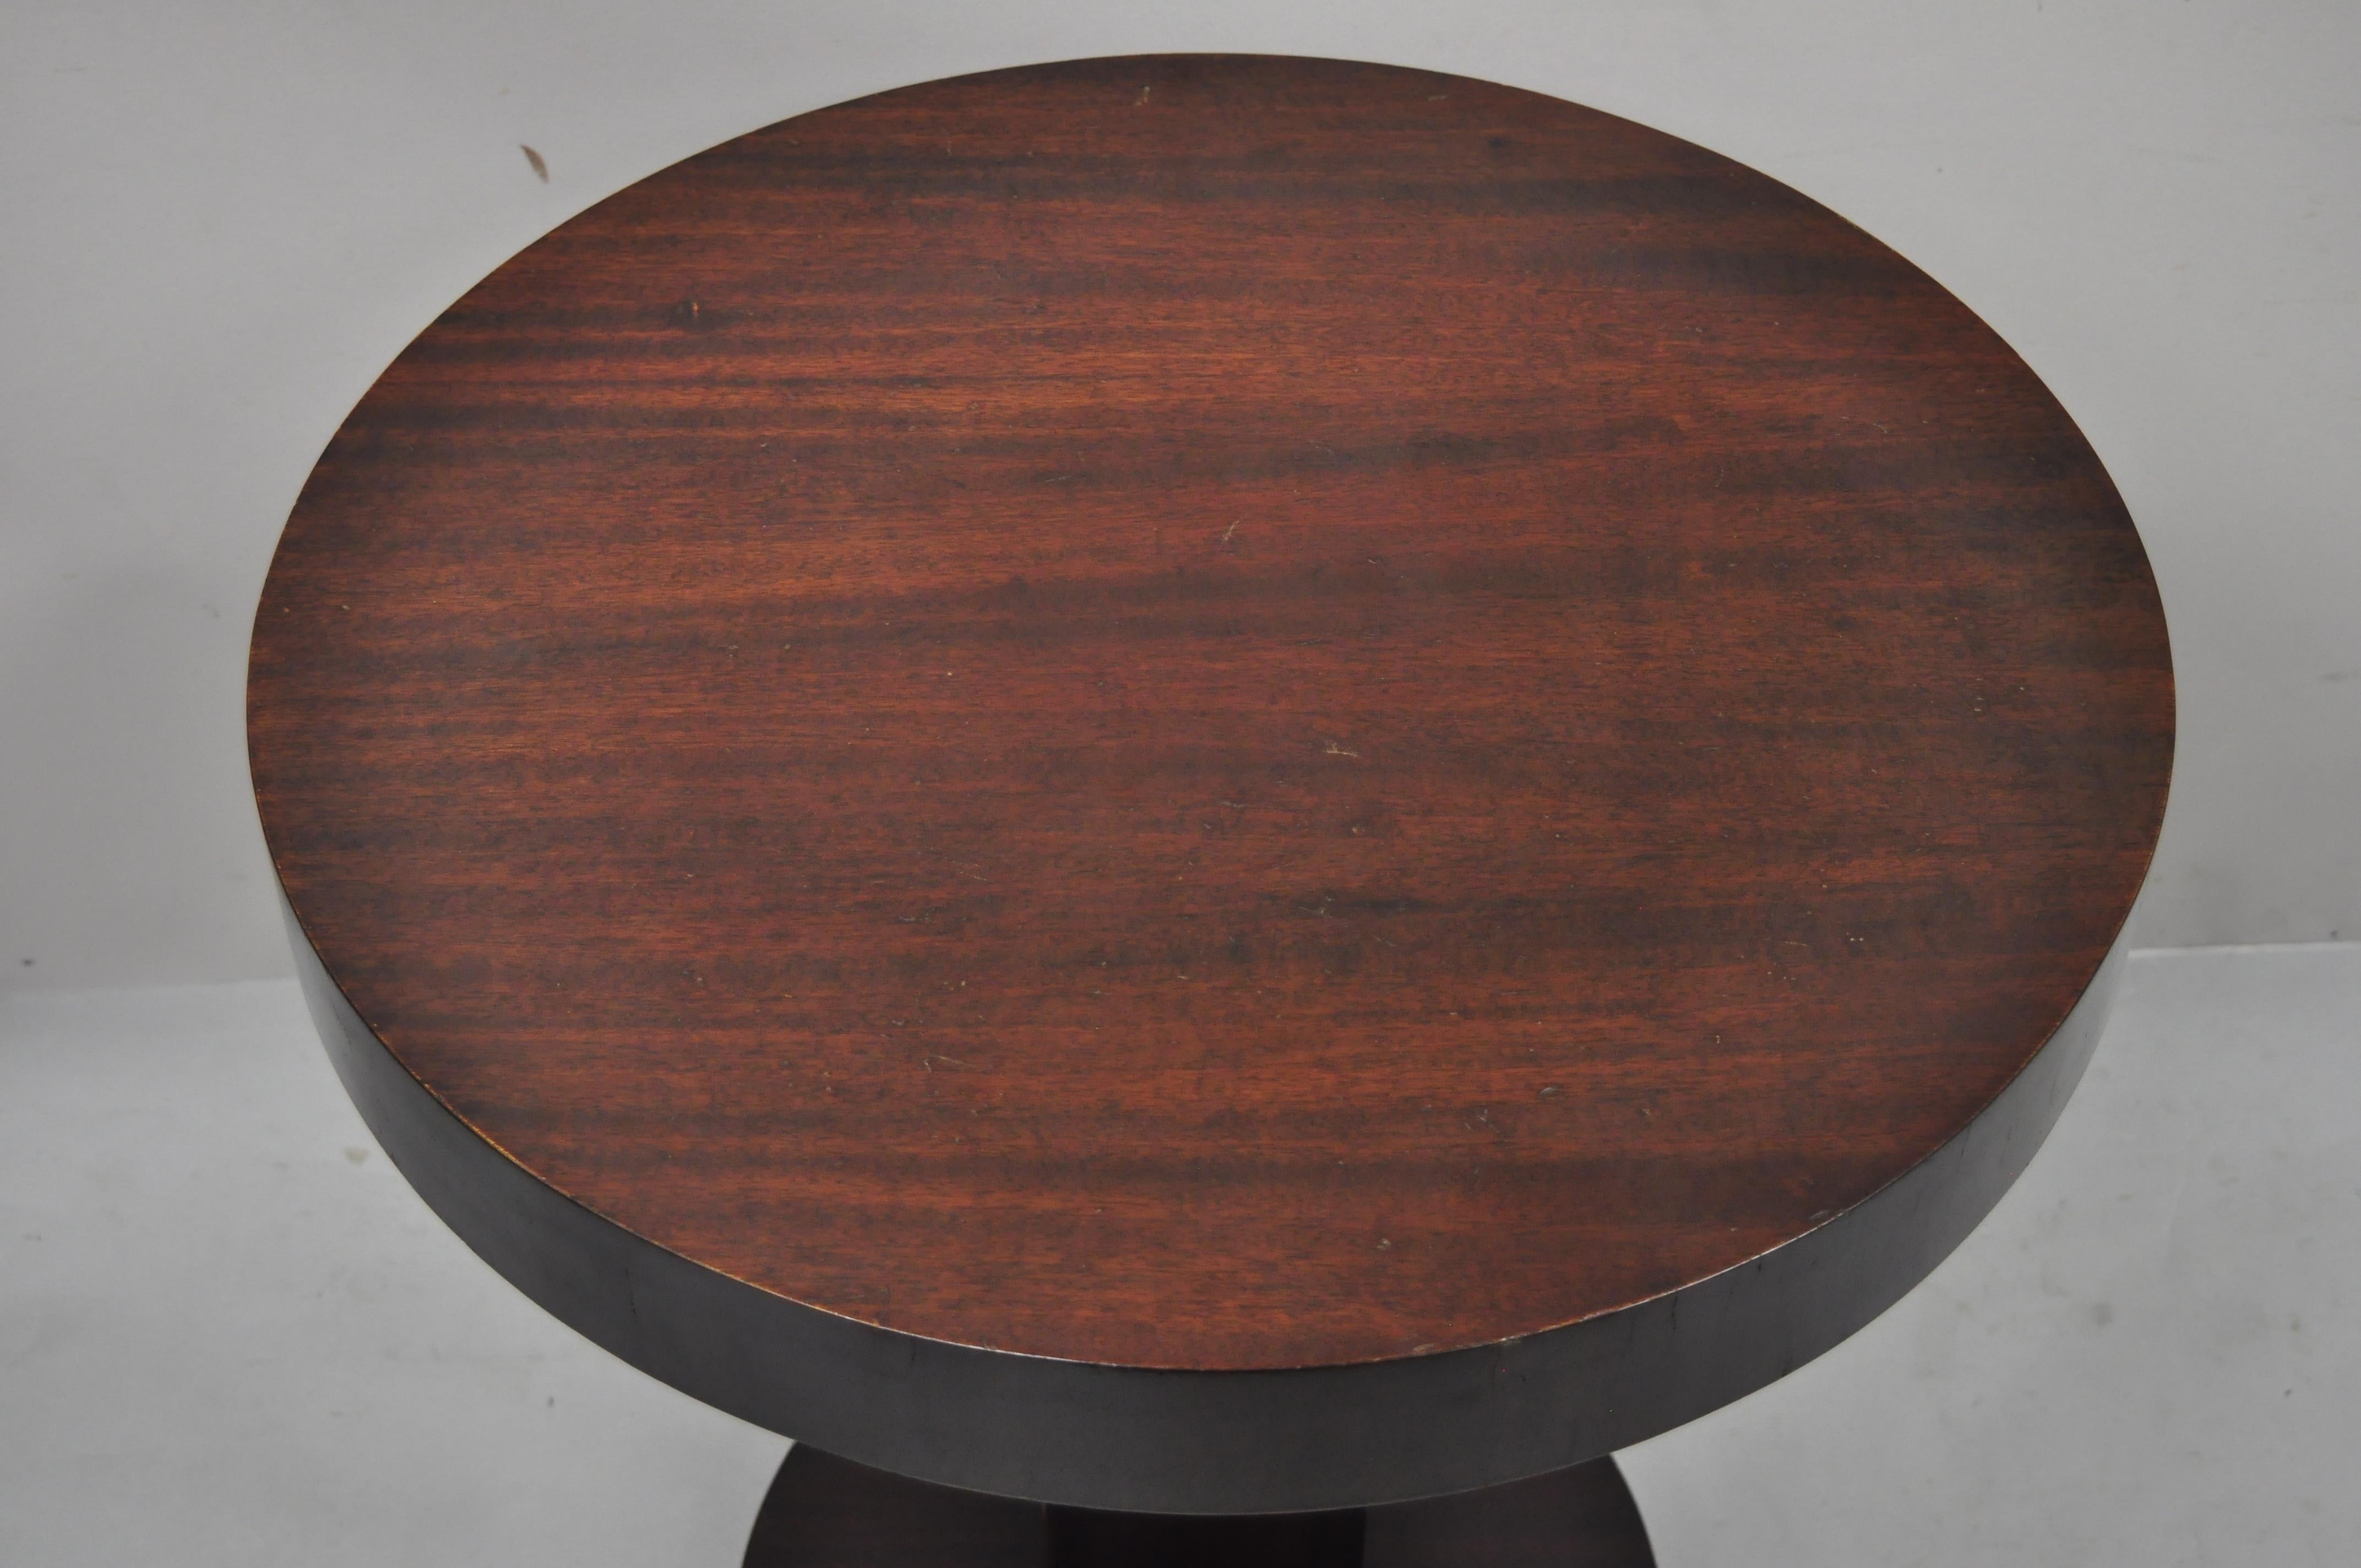 North American Antique Art Deco Mahogany Round Pedestal Base Accent Center Plant Stand Table